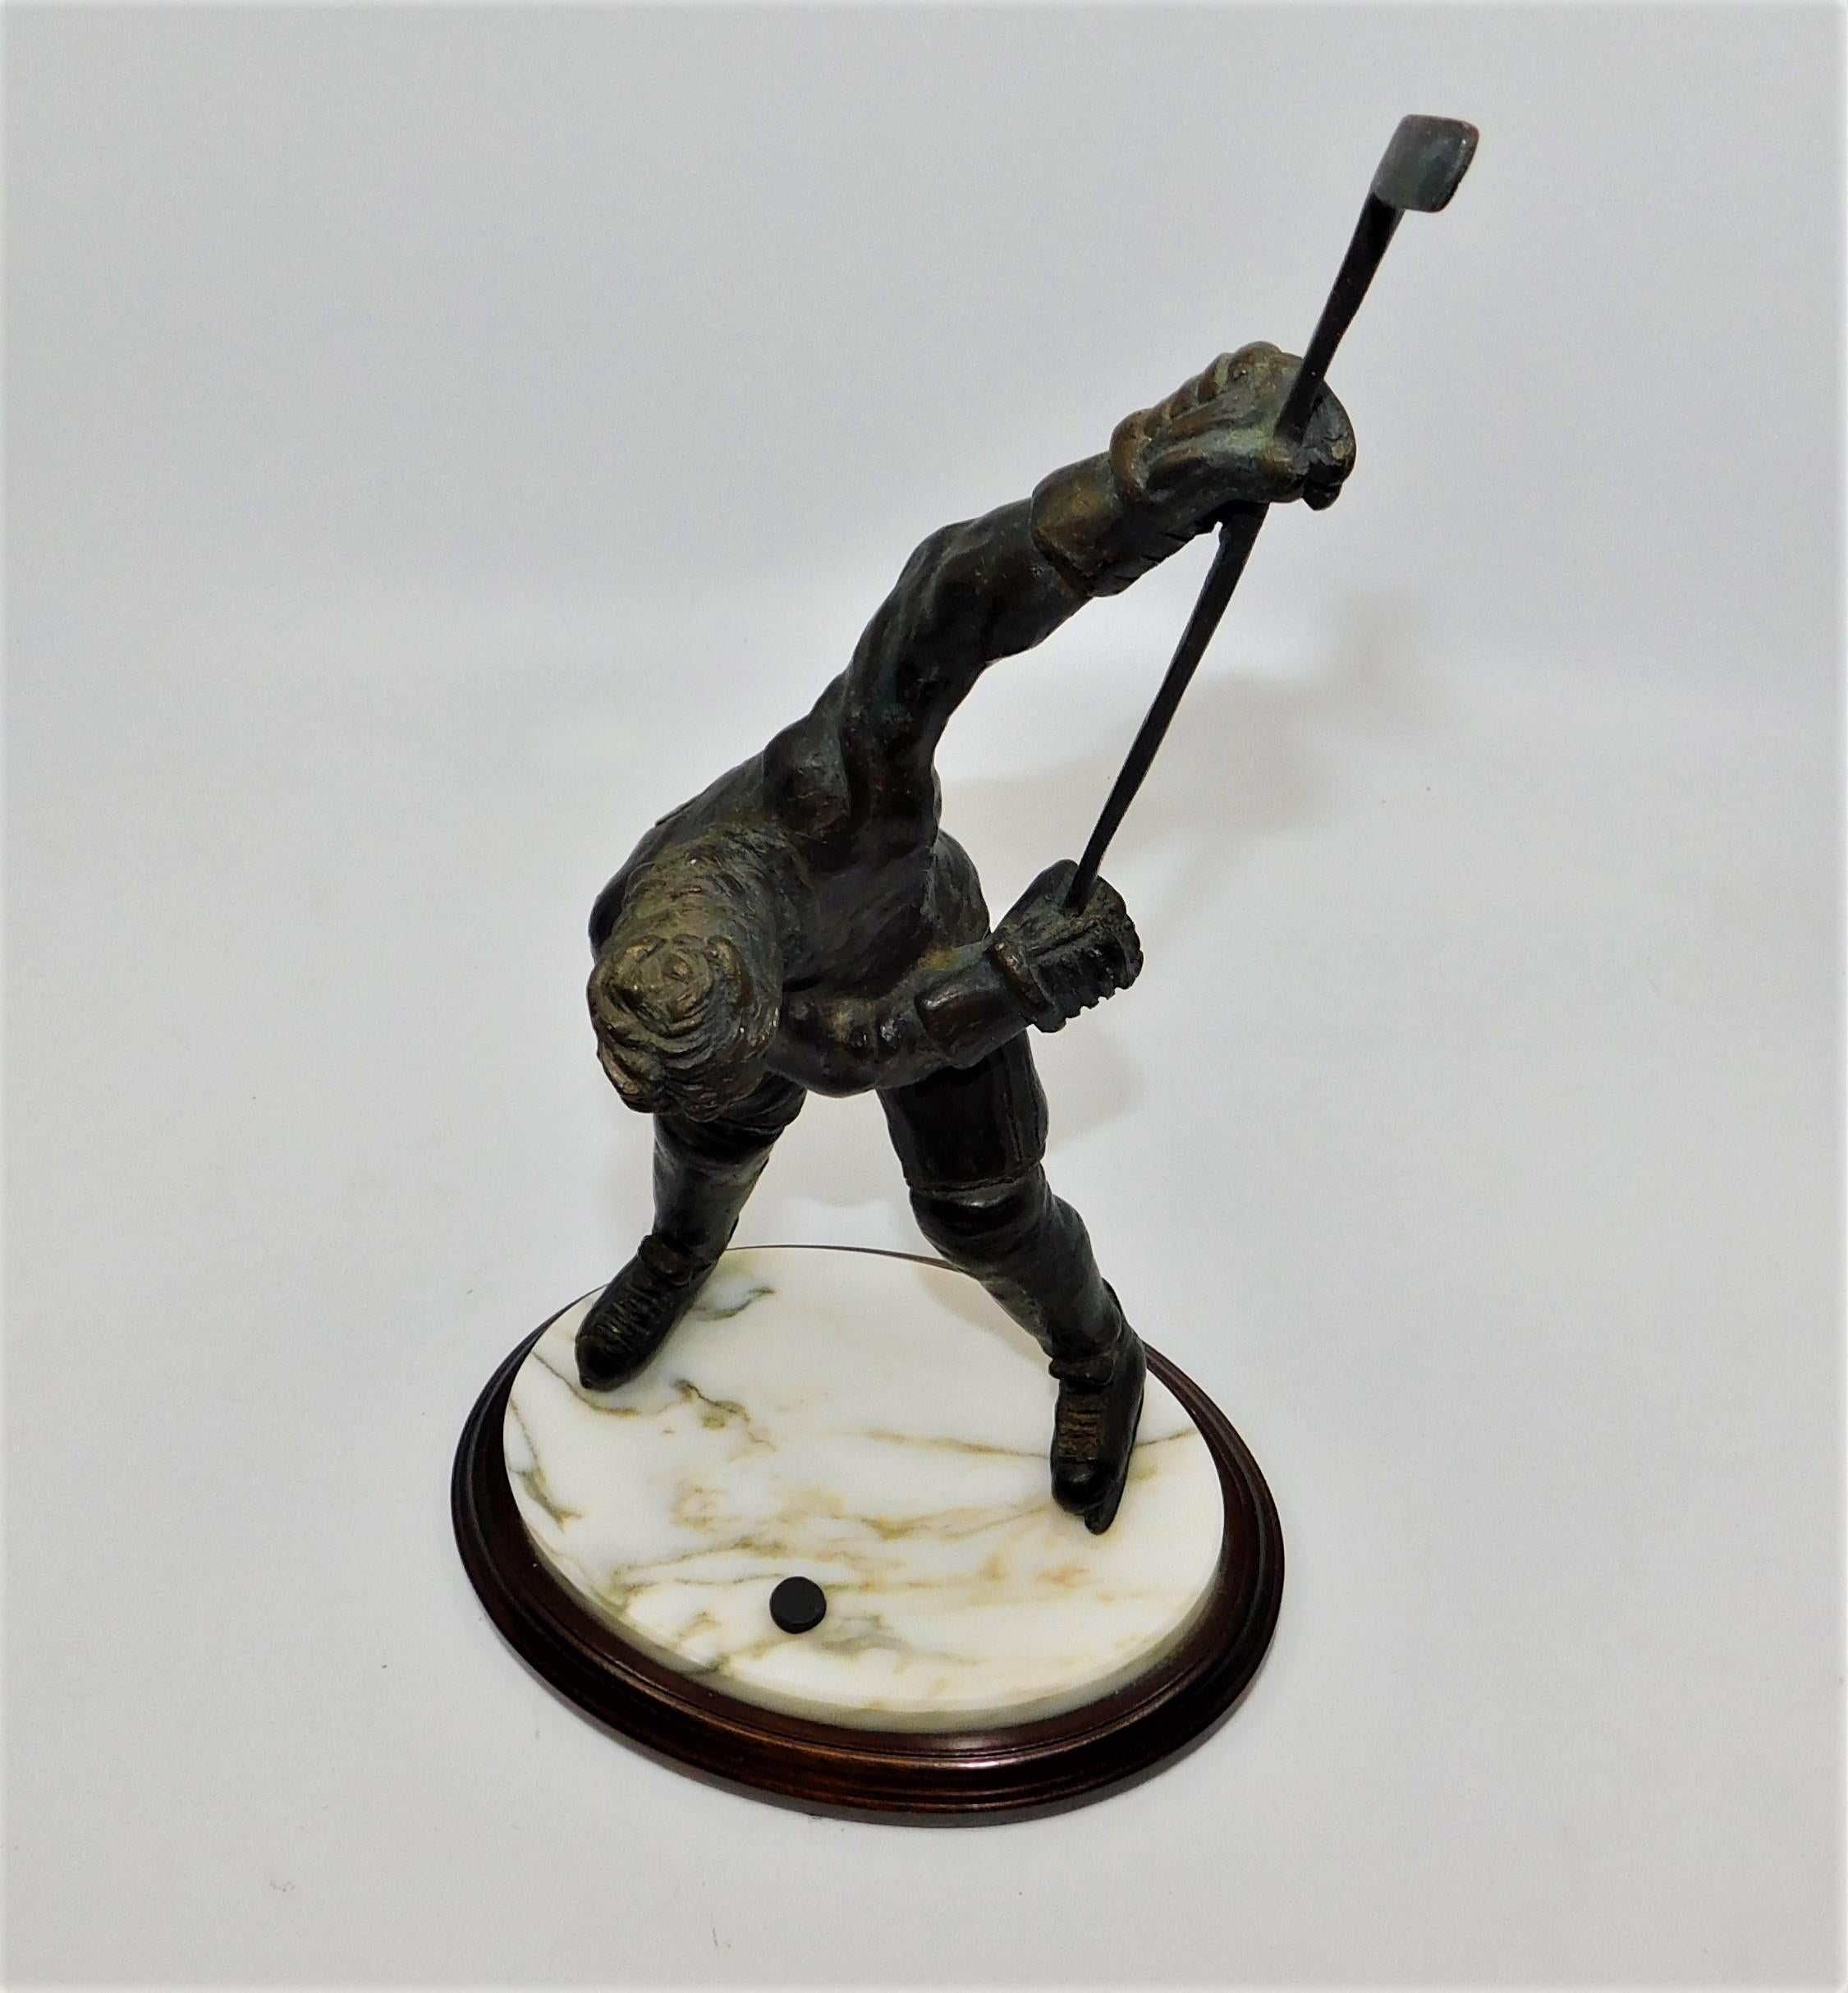 Wayne Gretzky 1985 Limited-Edition Hand Sculpted Bronze Statue #20/200 3